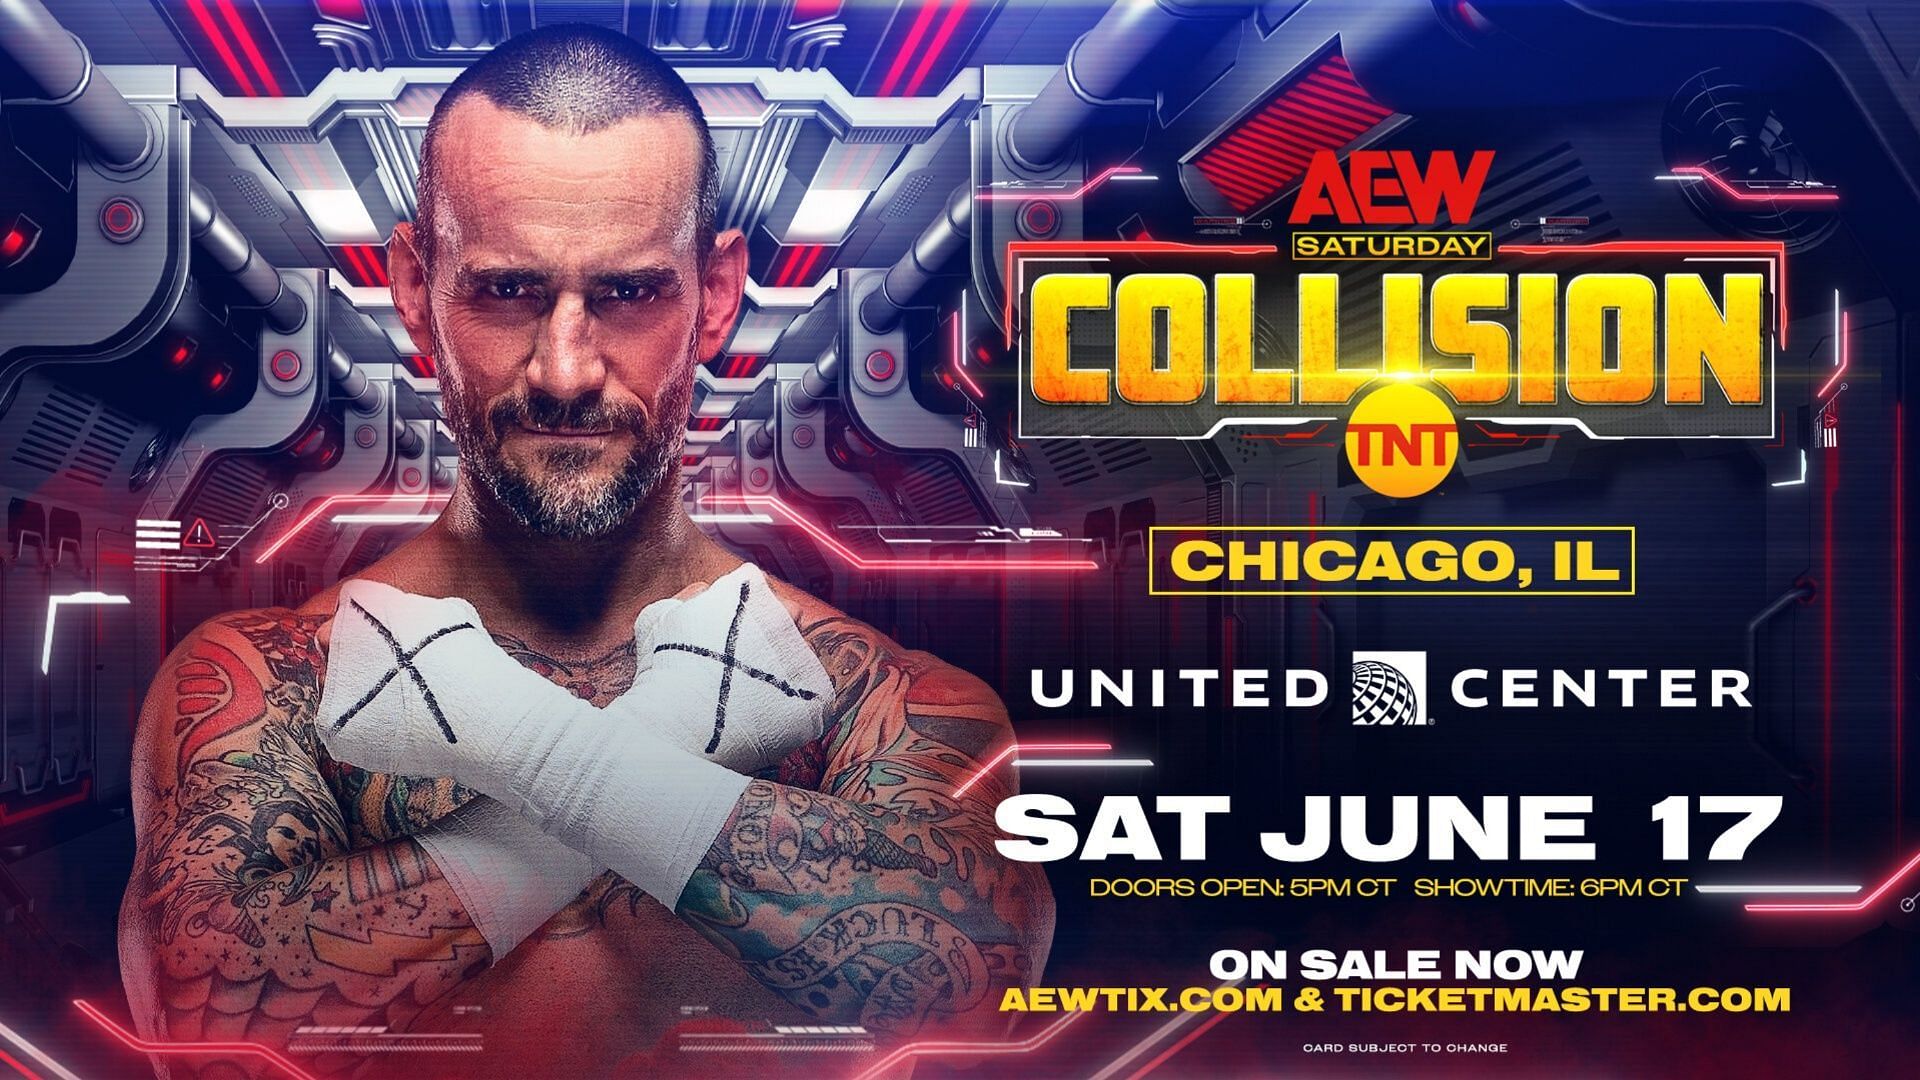 CM Punk was officially announced for AEW Collision on Dynamite this week.